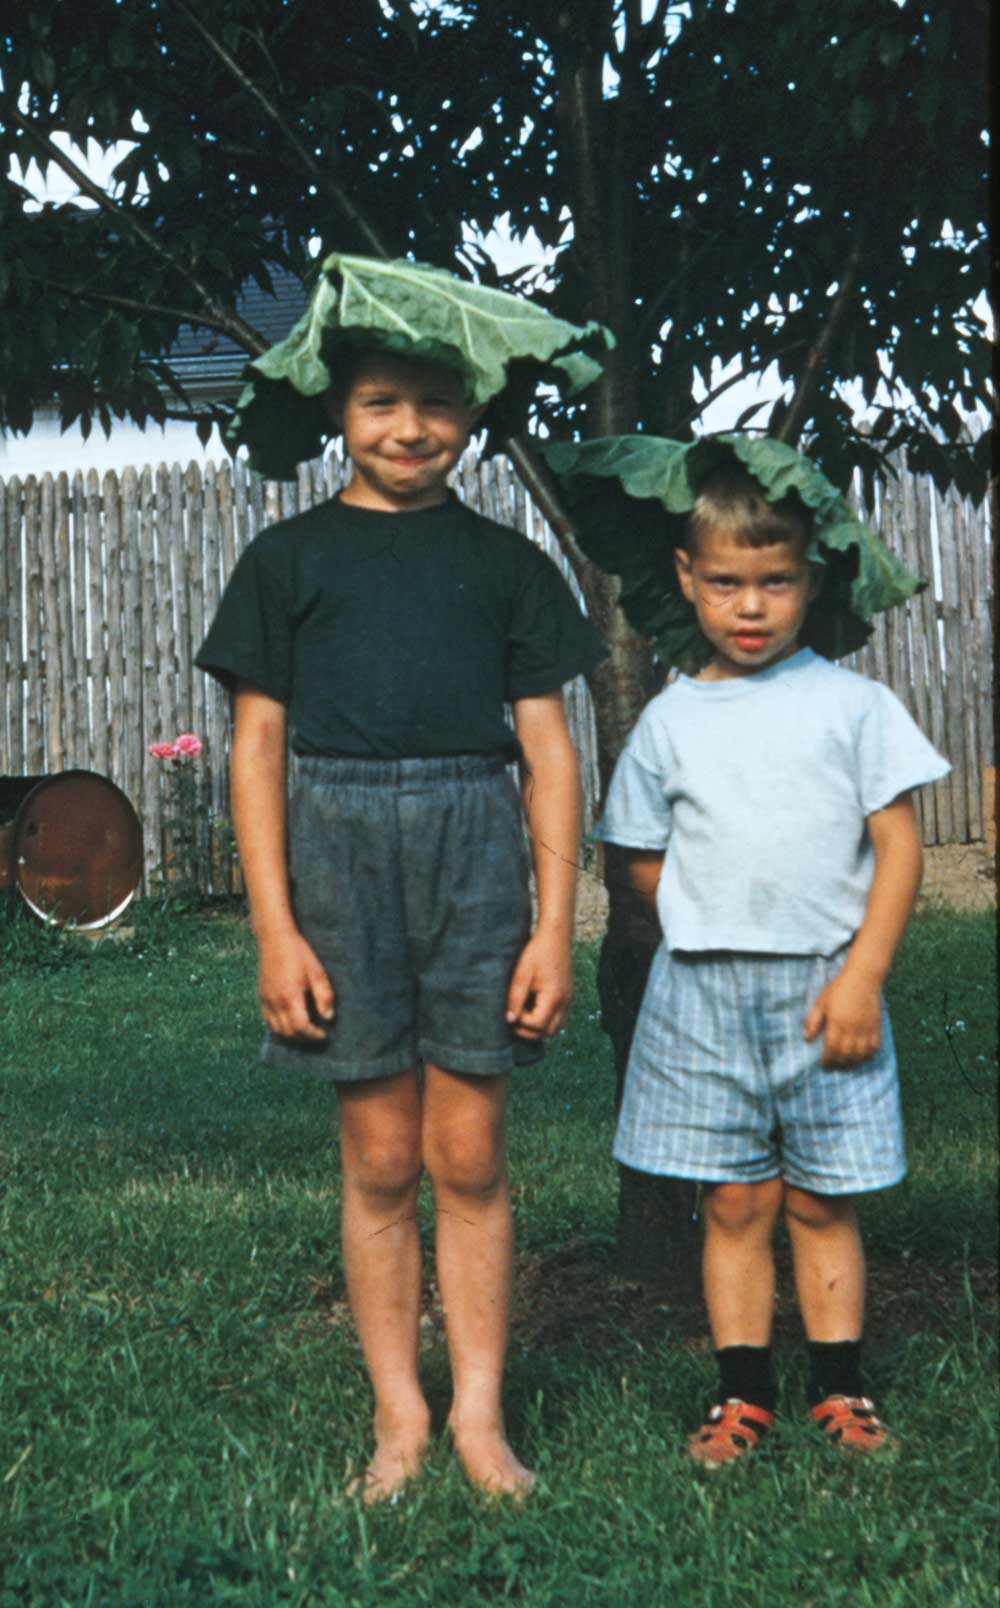 What do you do on a warm summer's day, when Mom has just had you cut the stalks for one of her mouth-puckering rhubarb pies? Simple, you make hats of the leaves. (Then you look simple, too.) Me and my brother, roughly 1956. (Wonder if that rake is still tines up in the garden behind us?) Kodachrome, Kodak Retina. View full size.